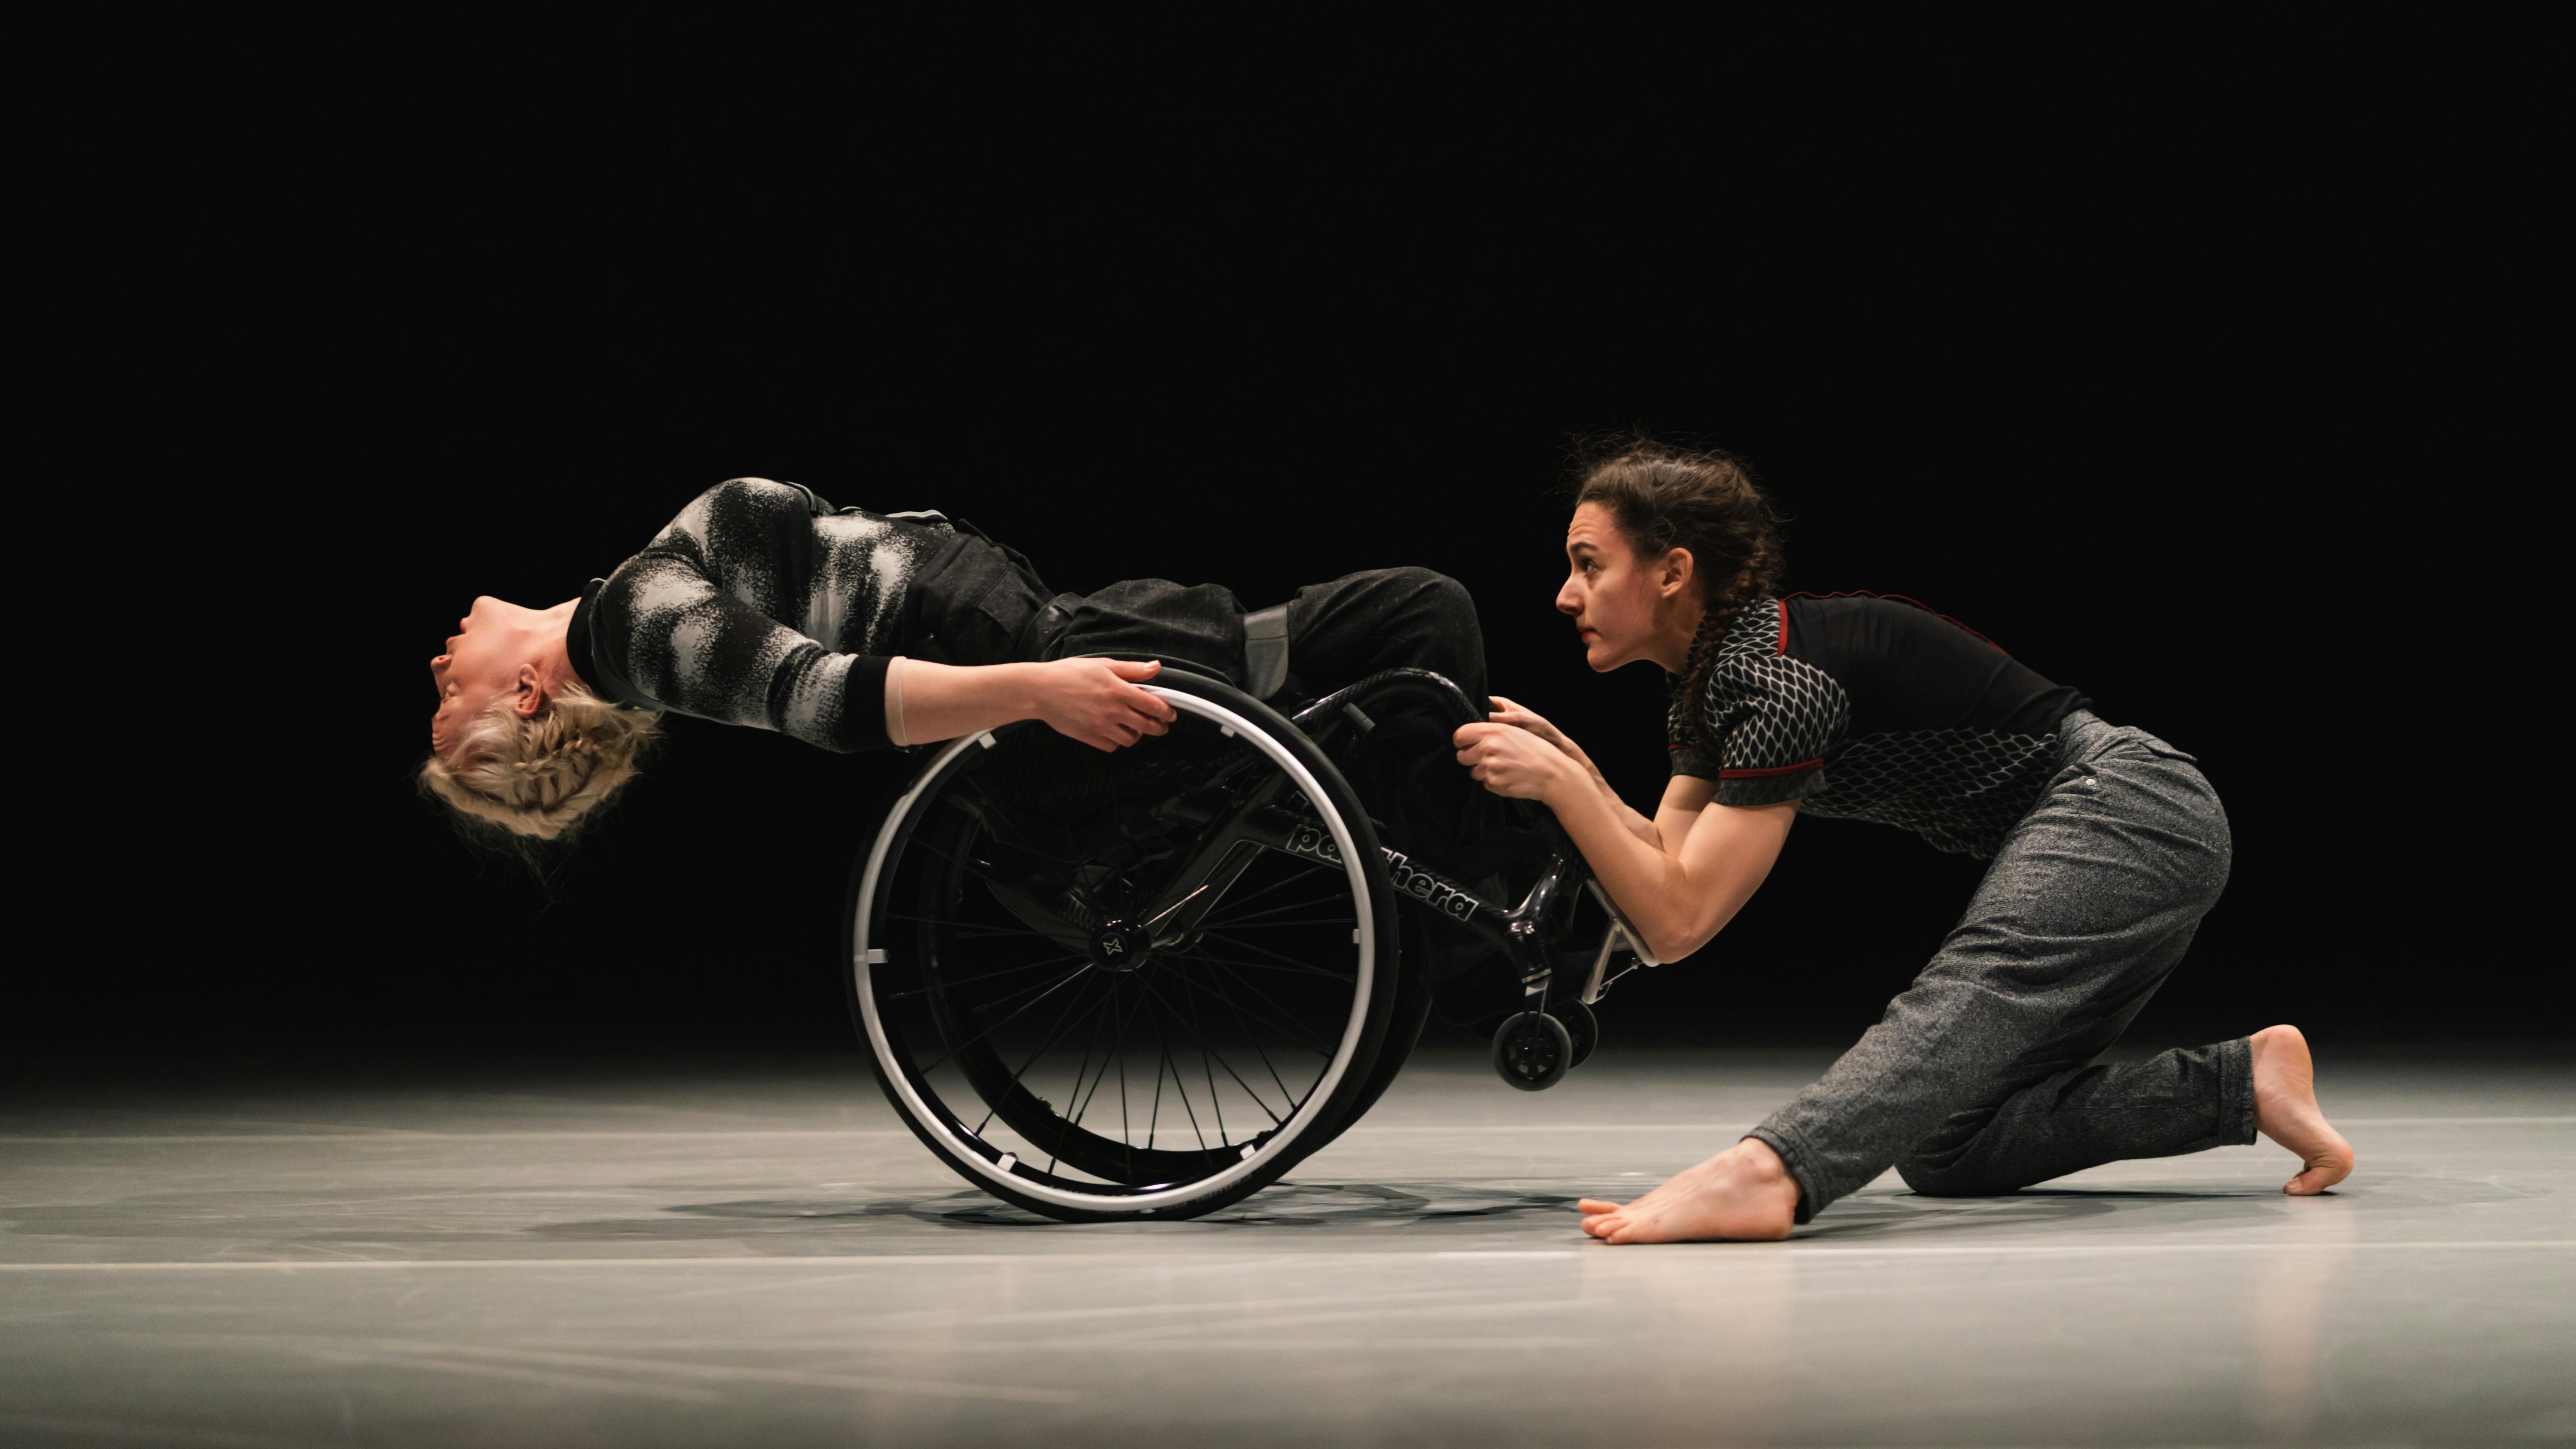 Two dancers, one of them in a wheelchair are in profile facing each other. The dancer in the wheelchair is falling backwards, while the other grabs her legs.